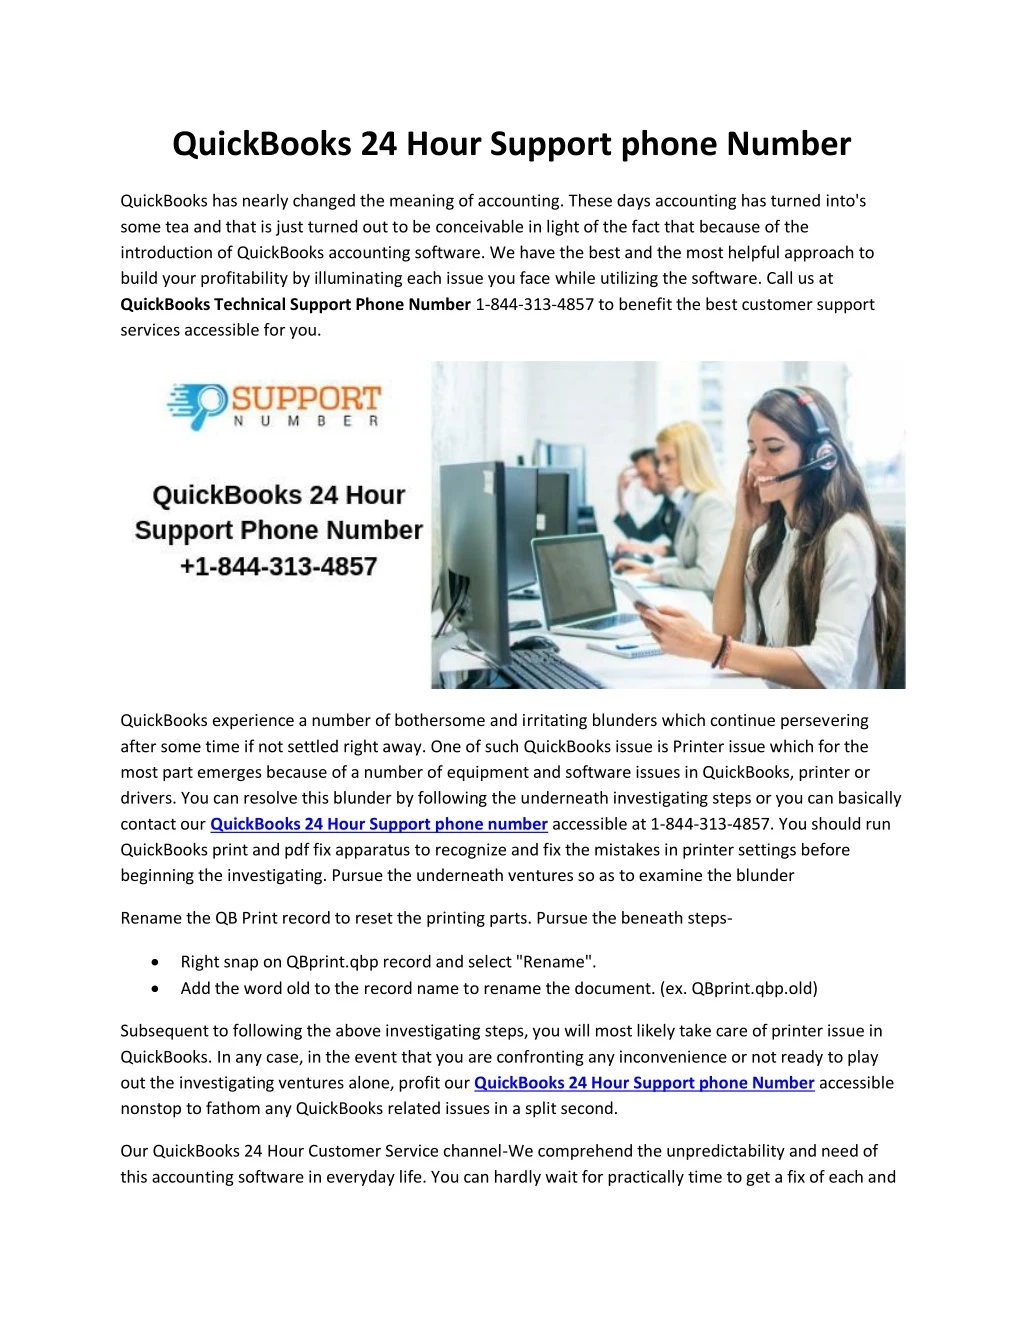 quickbooks 24 hour support phone number